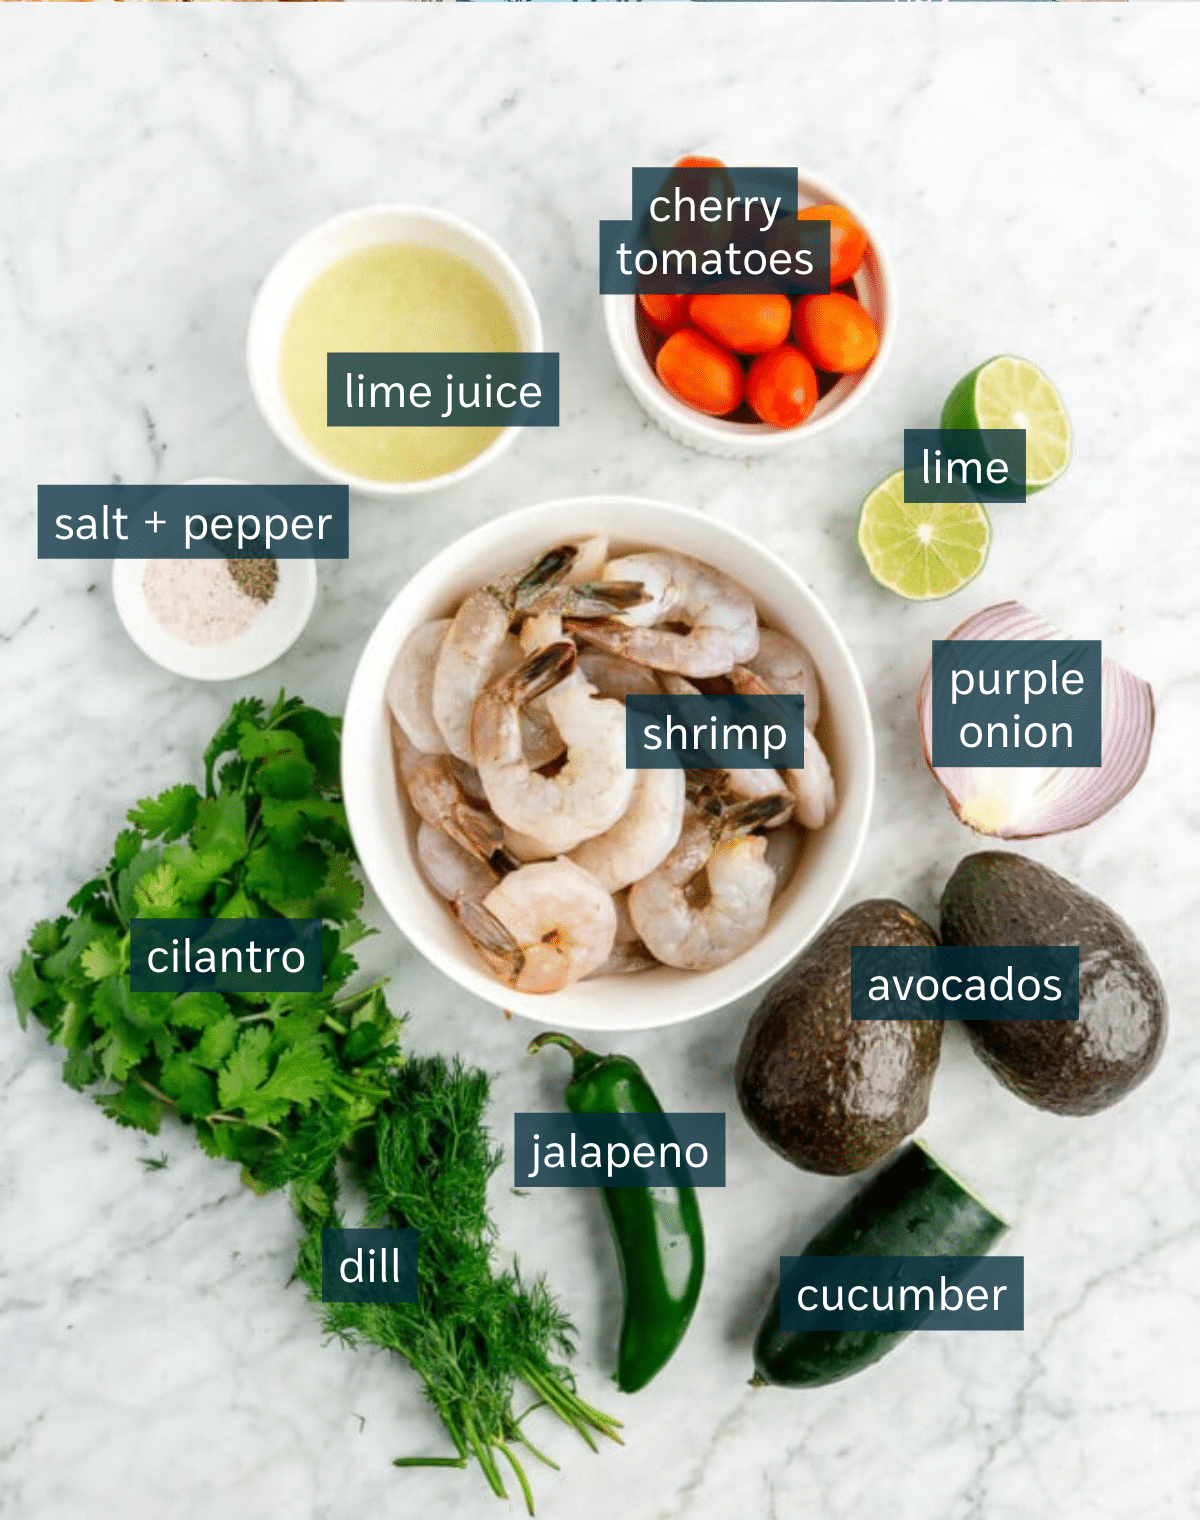 Ingredients for easy shrimp ceviche with avocado sit on a marble countertop.